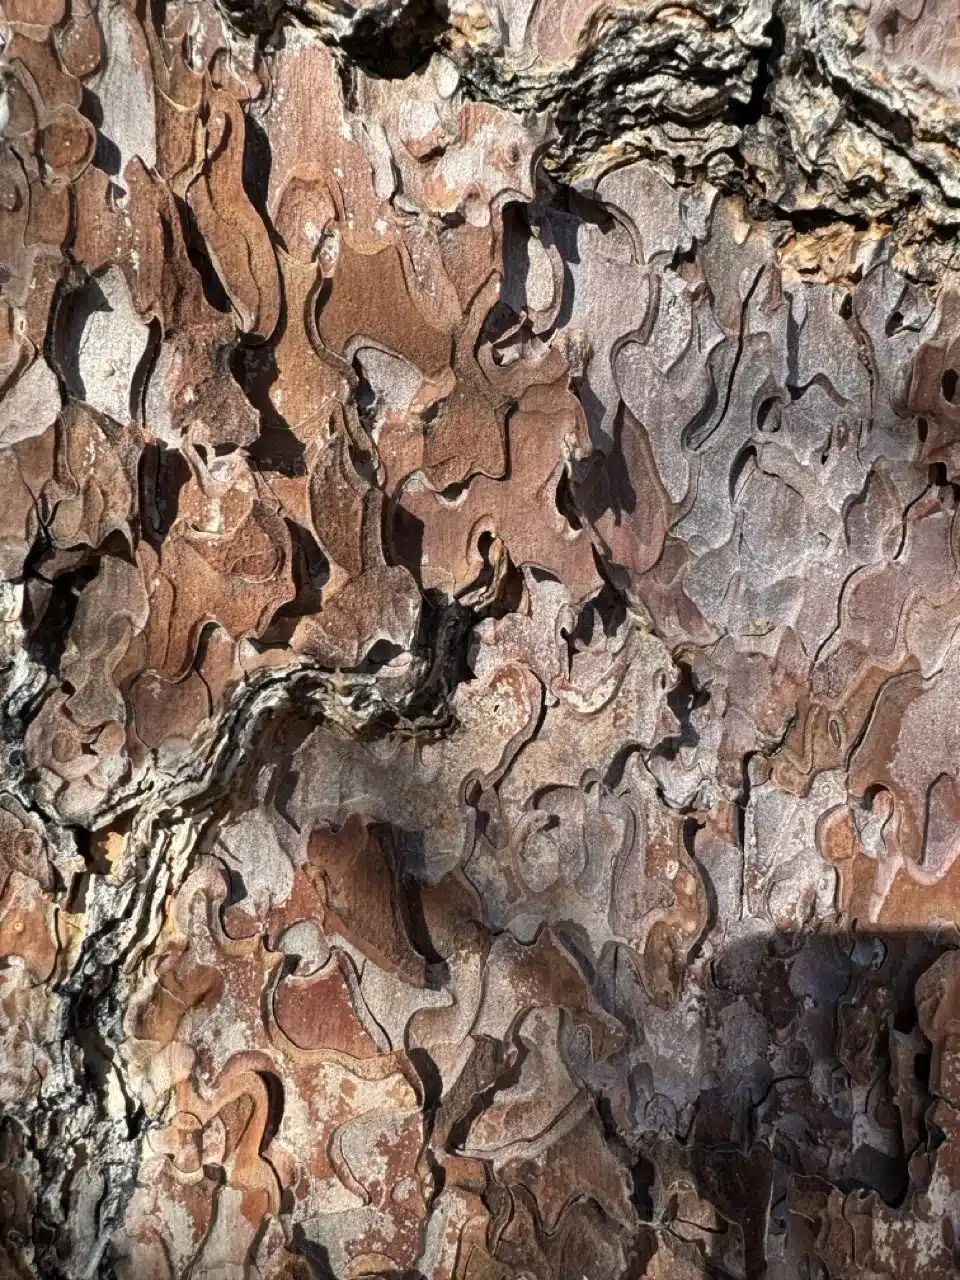 Bark from Tahoe National Forest